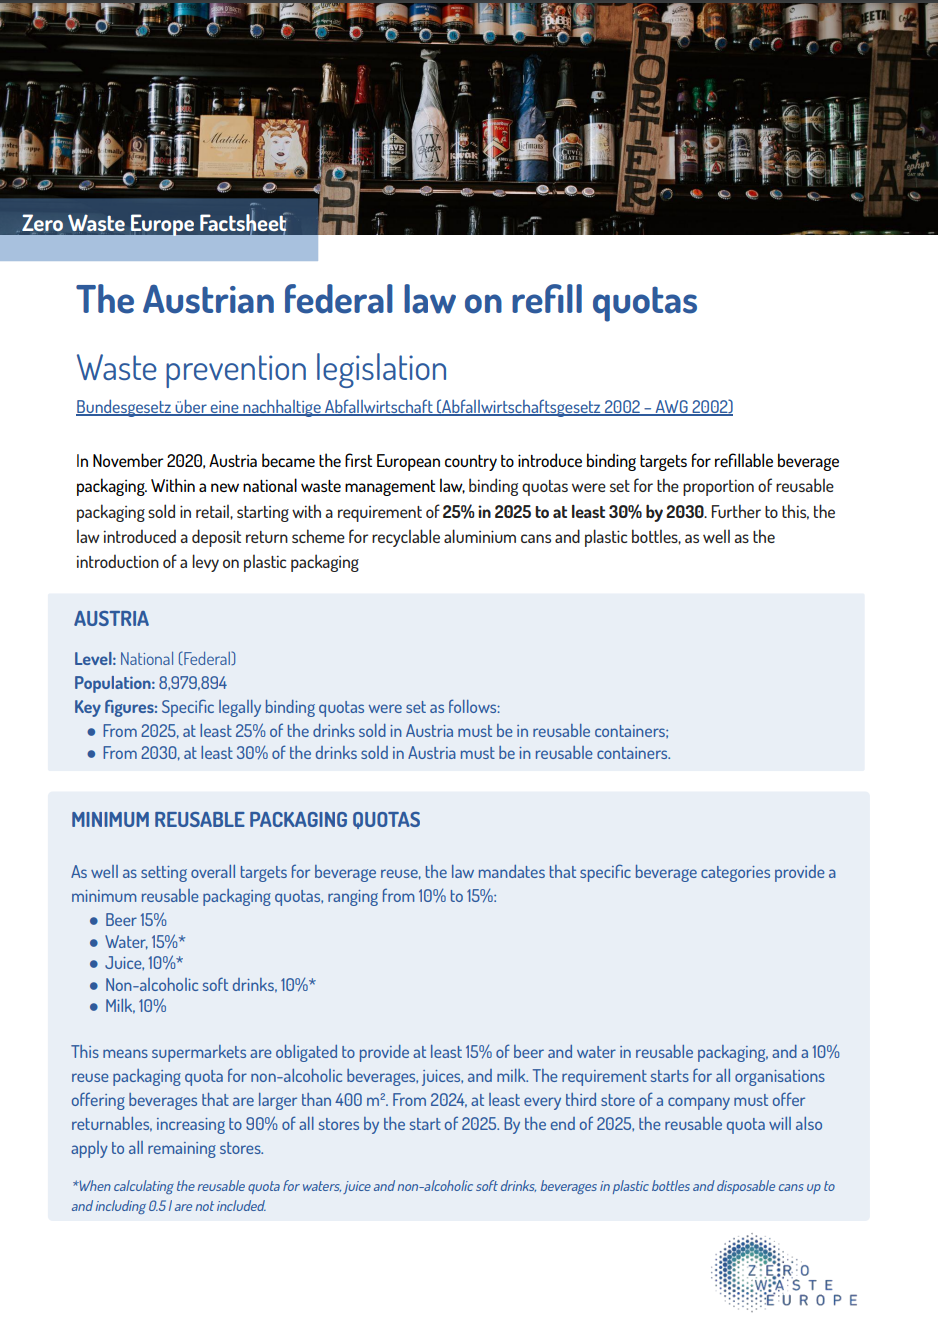 The Austrian federal law on refill quotas